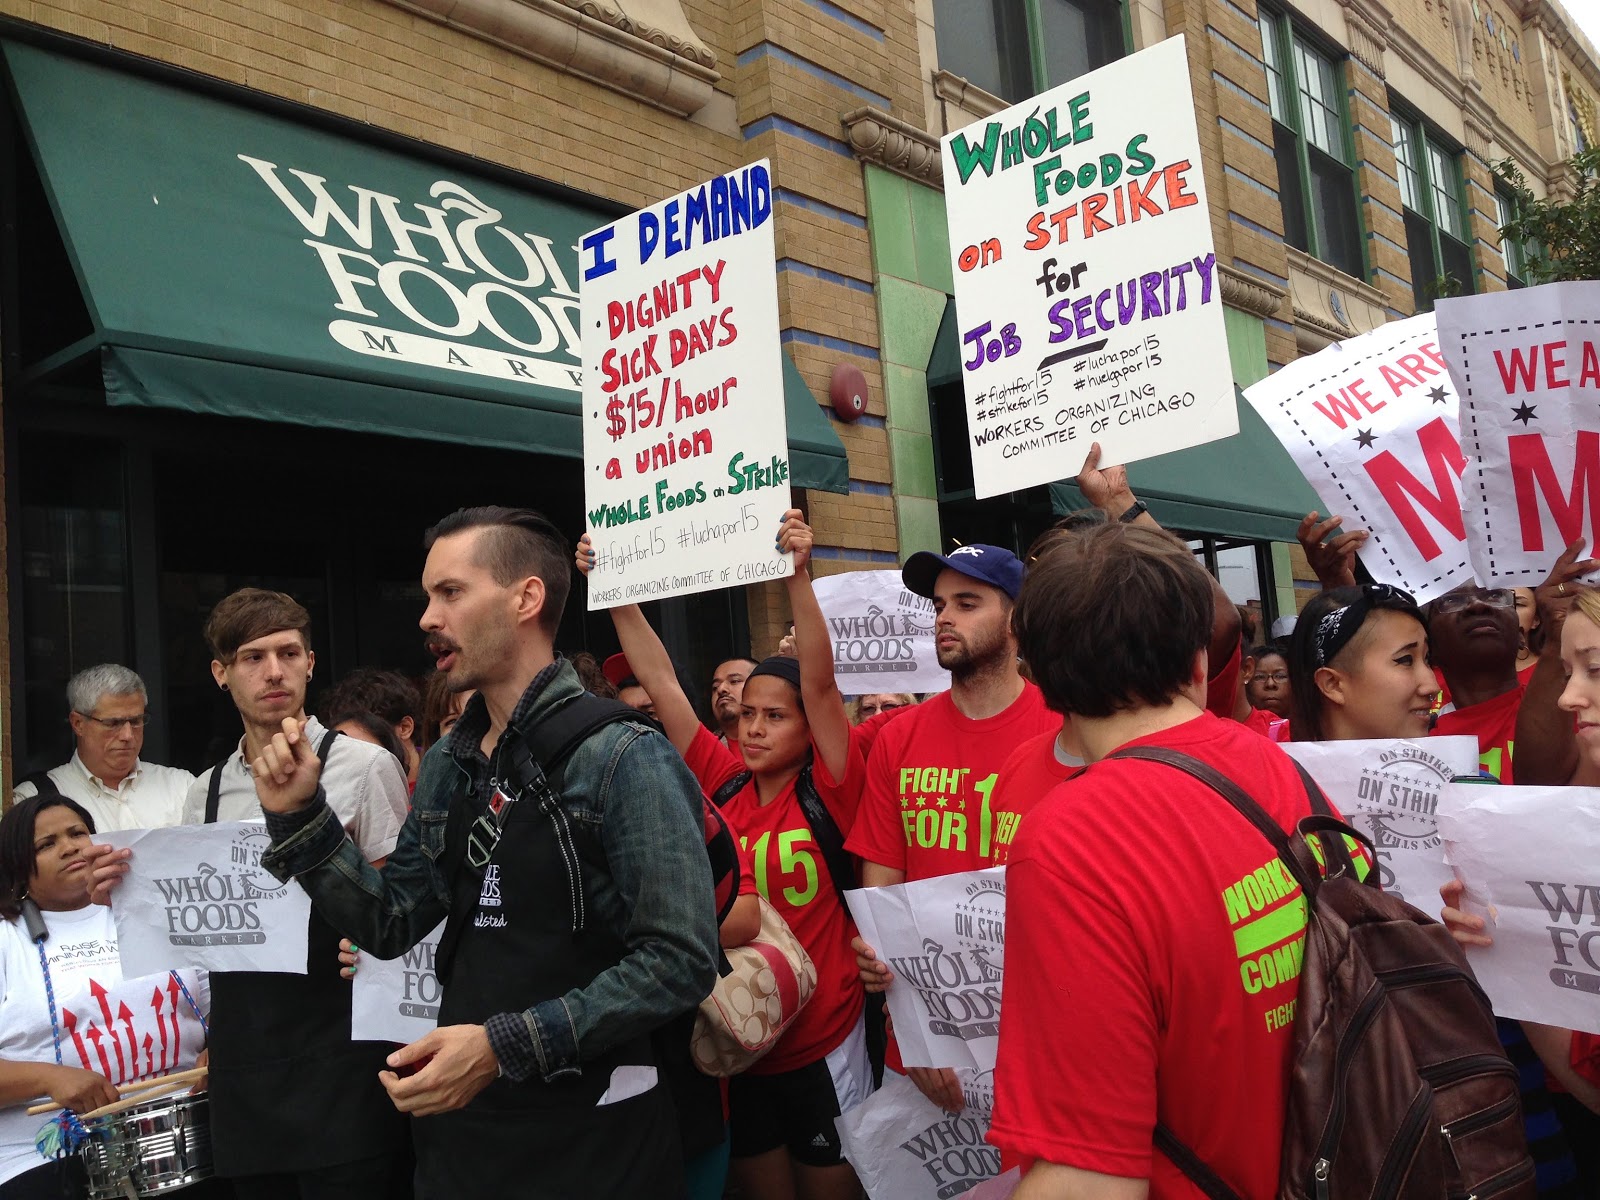 Fight for 15, Chicago, Whole Foods